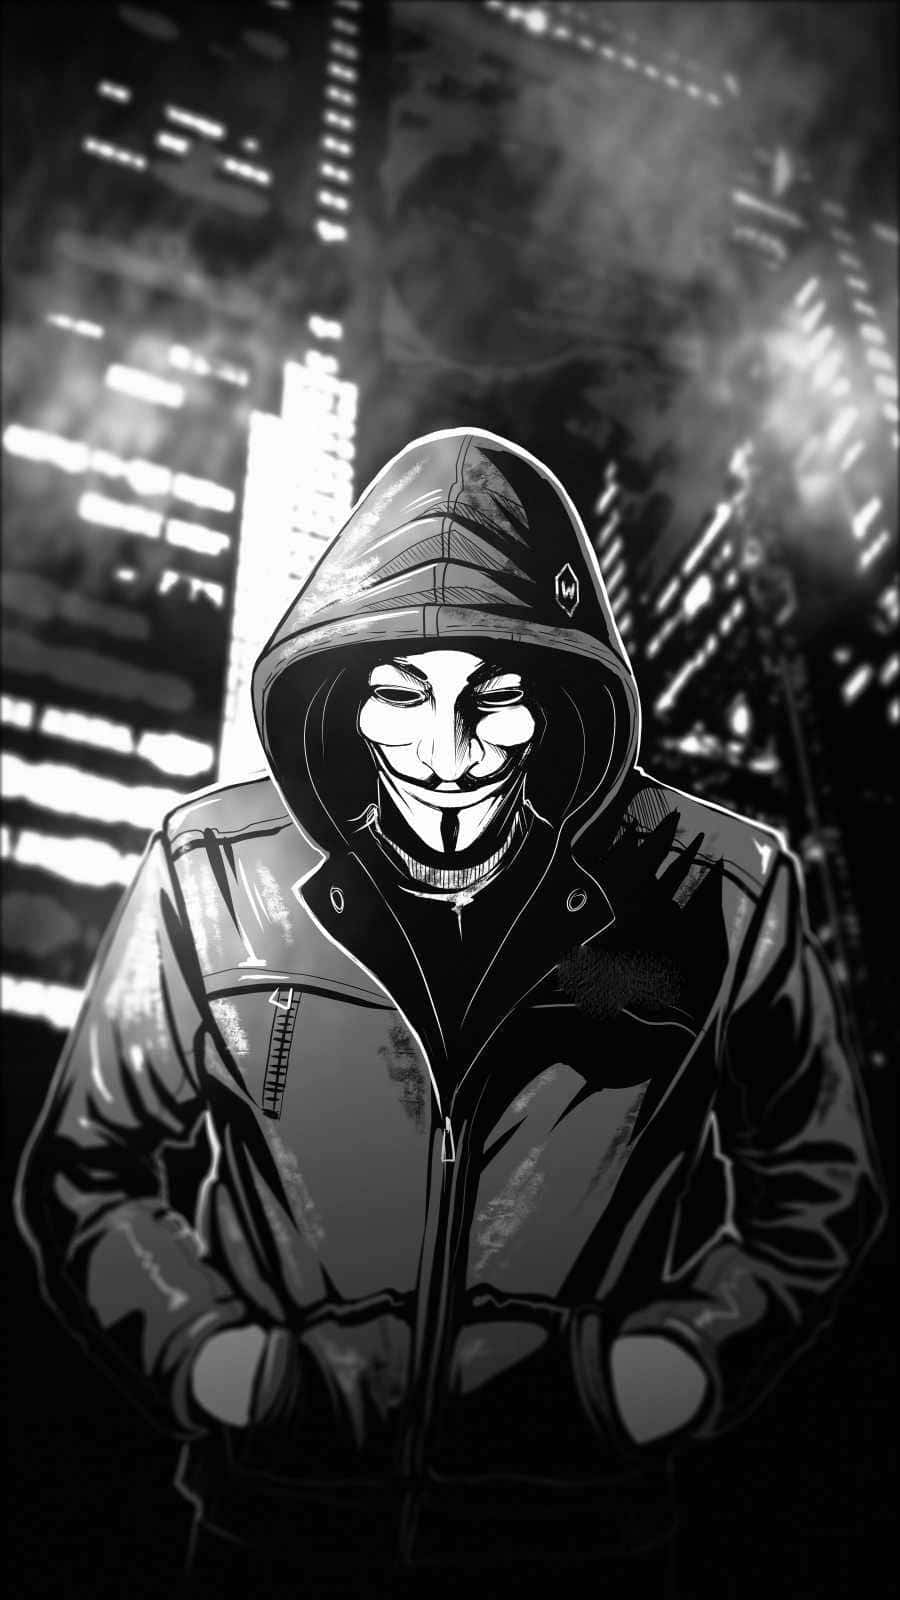 Willkommenbei Anonymes Iphone. Wallpaper